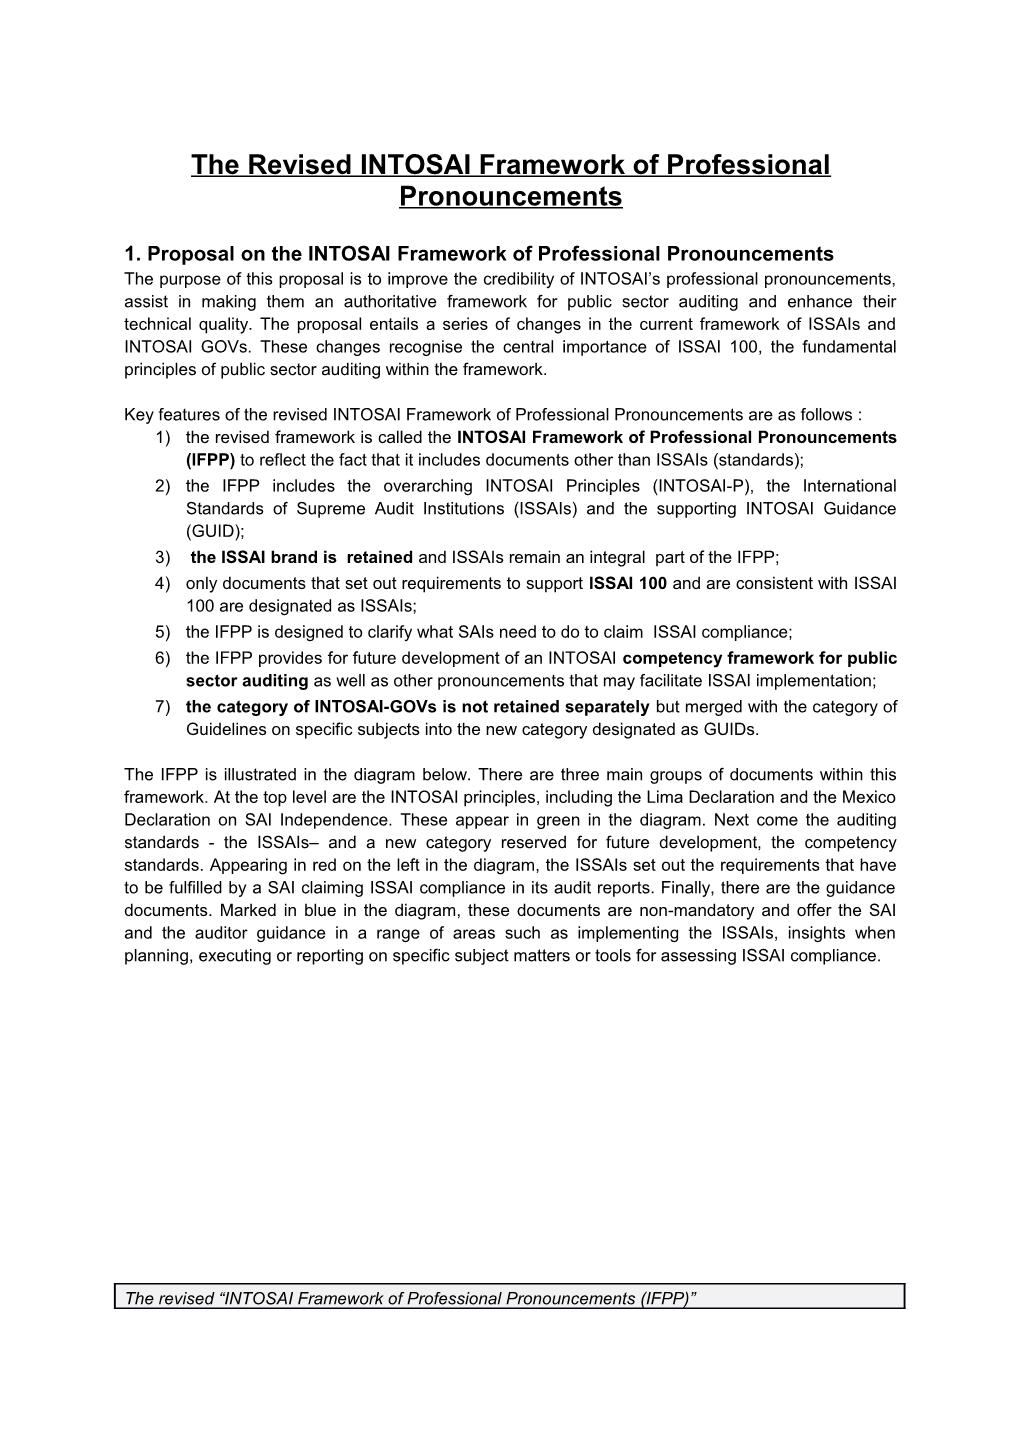 The Revised INTOSAI Framework of Professional Pronouncements